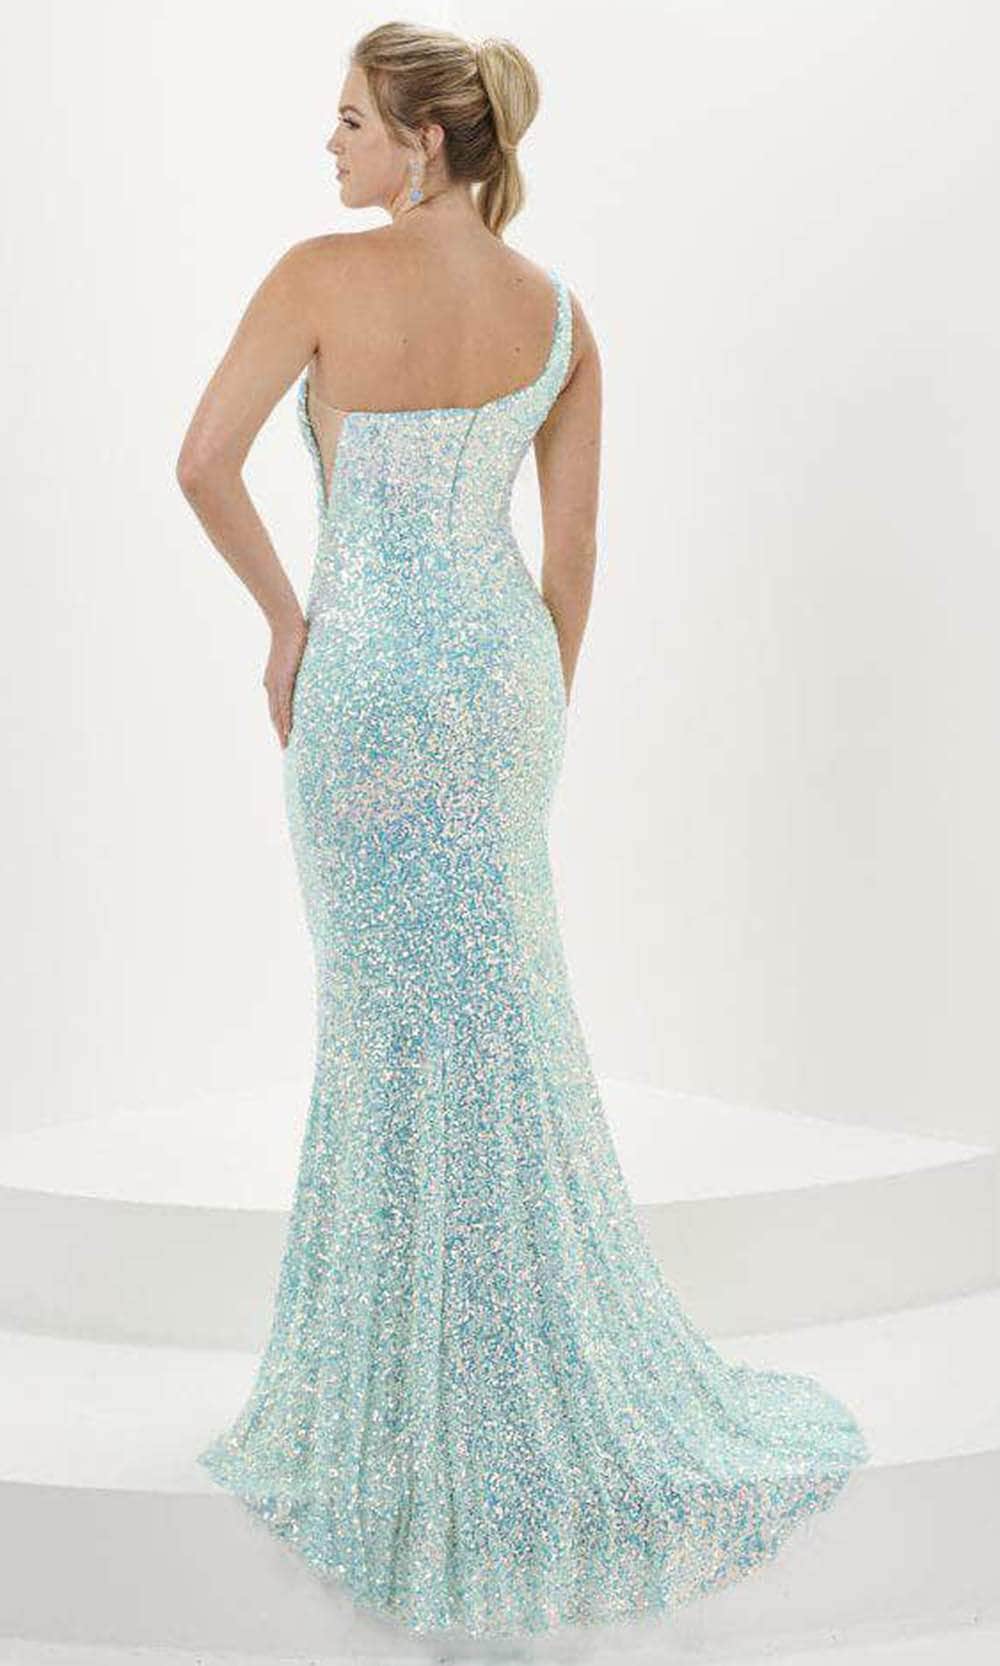 Tiffany Designs 16114 - One Shoulder Sequin Evening Gown Evening Dresses